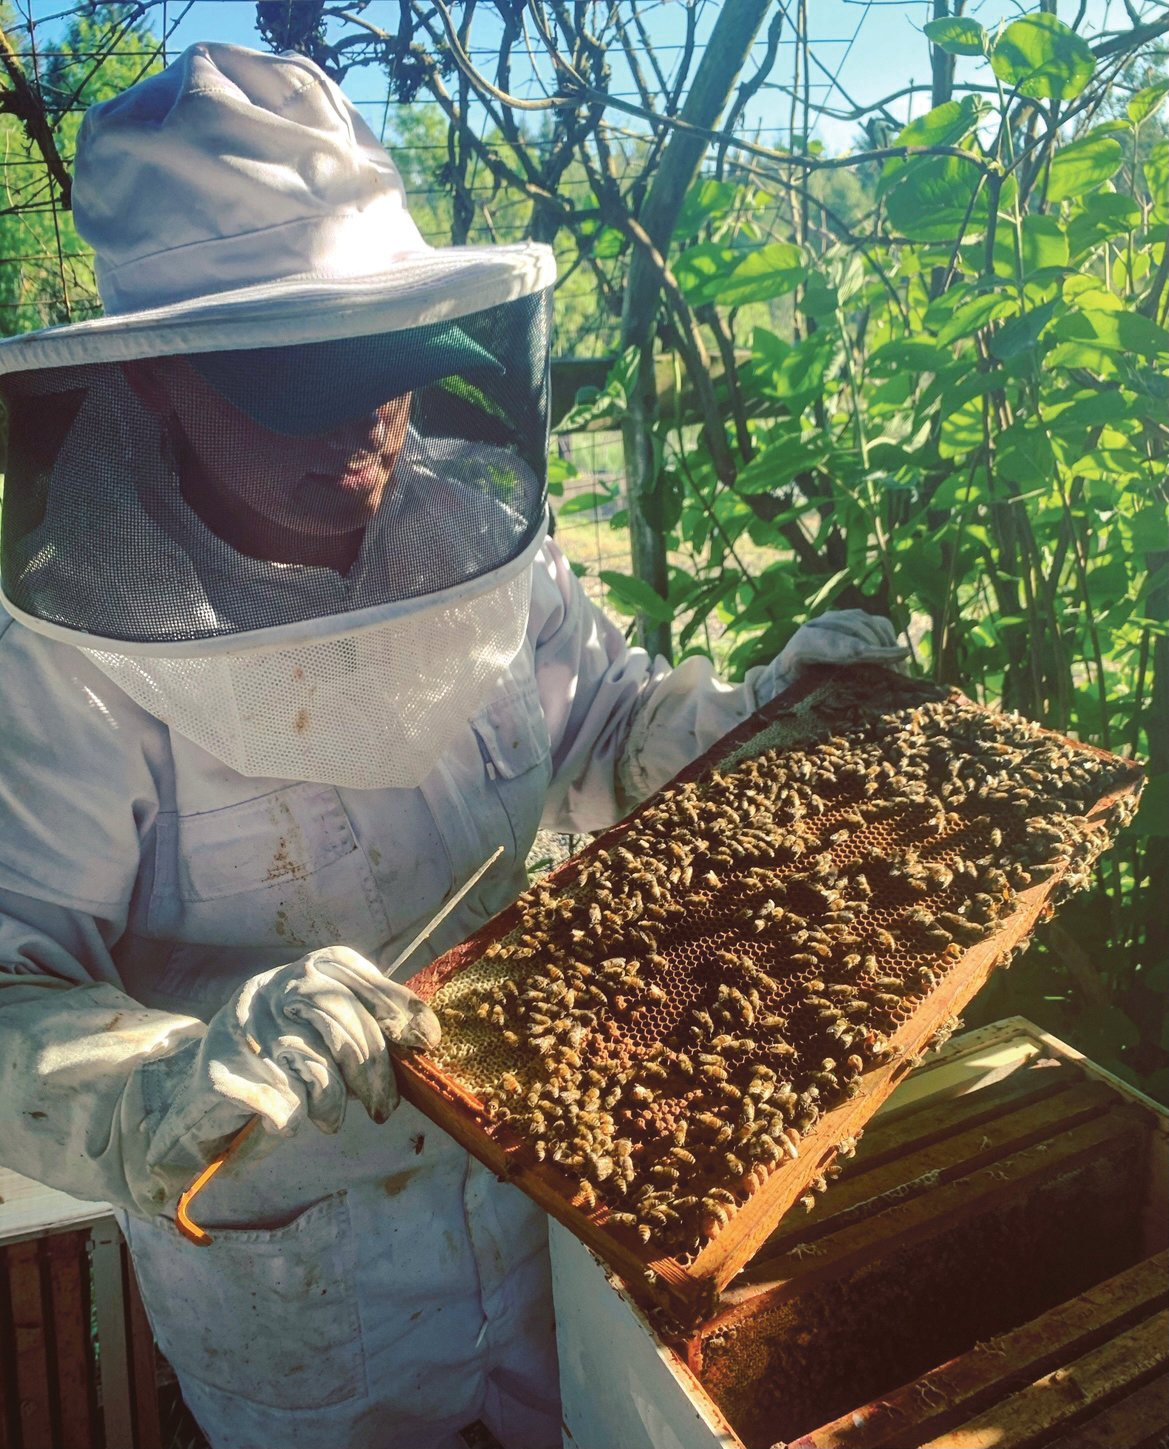 Sarah W. owner of Lemonbuzzzsoap in Centralia with a swarm of bees earlier this year. The family practices sustainable farming as part of their business model.